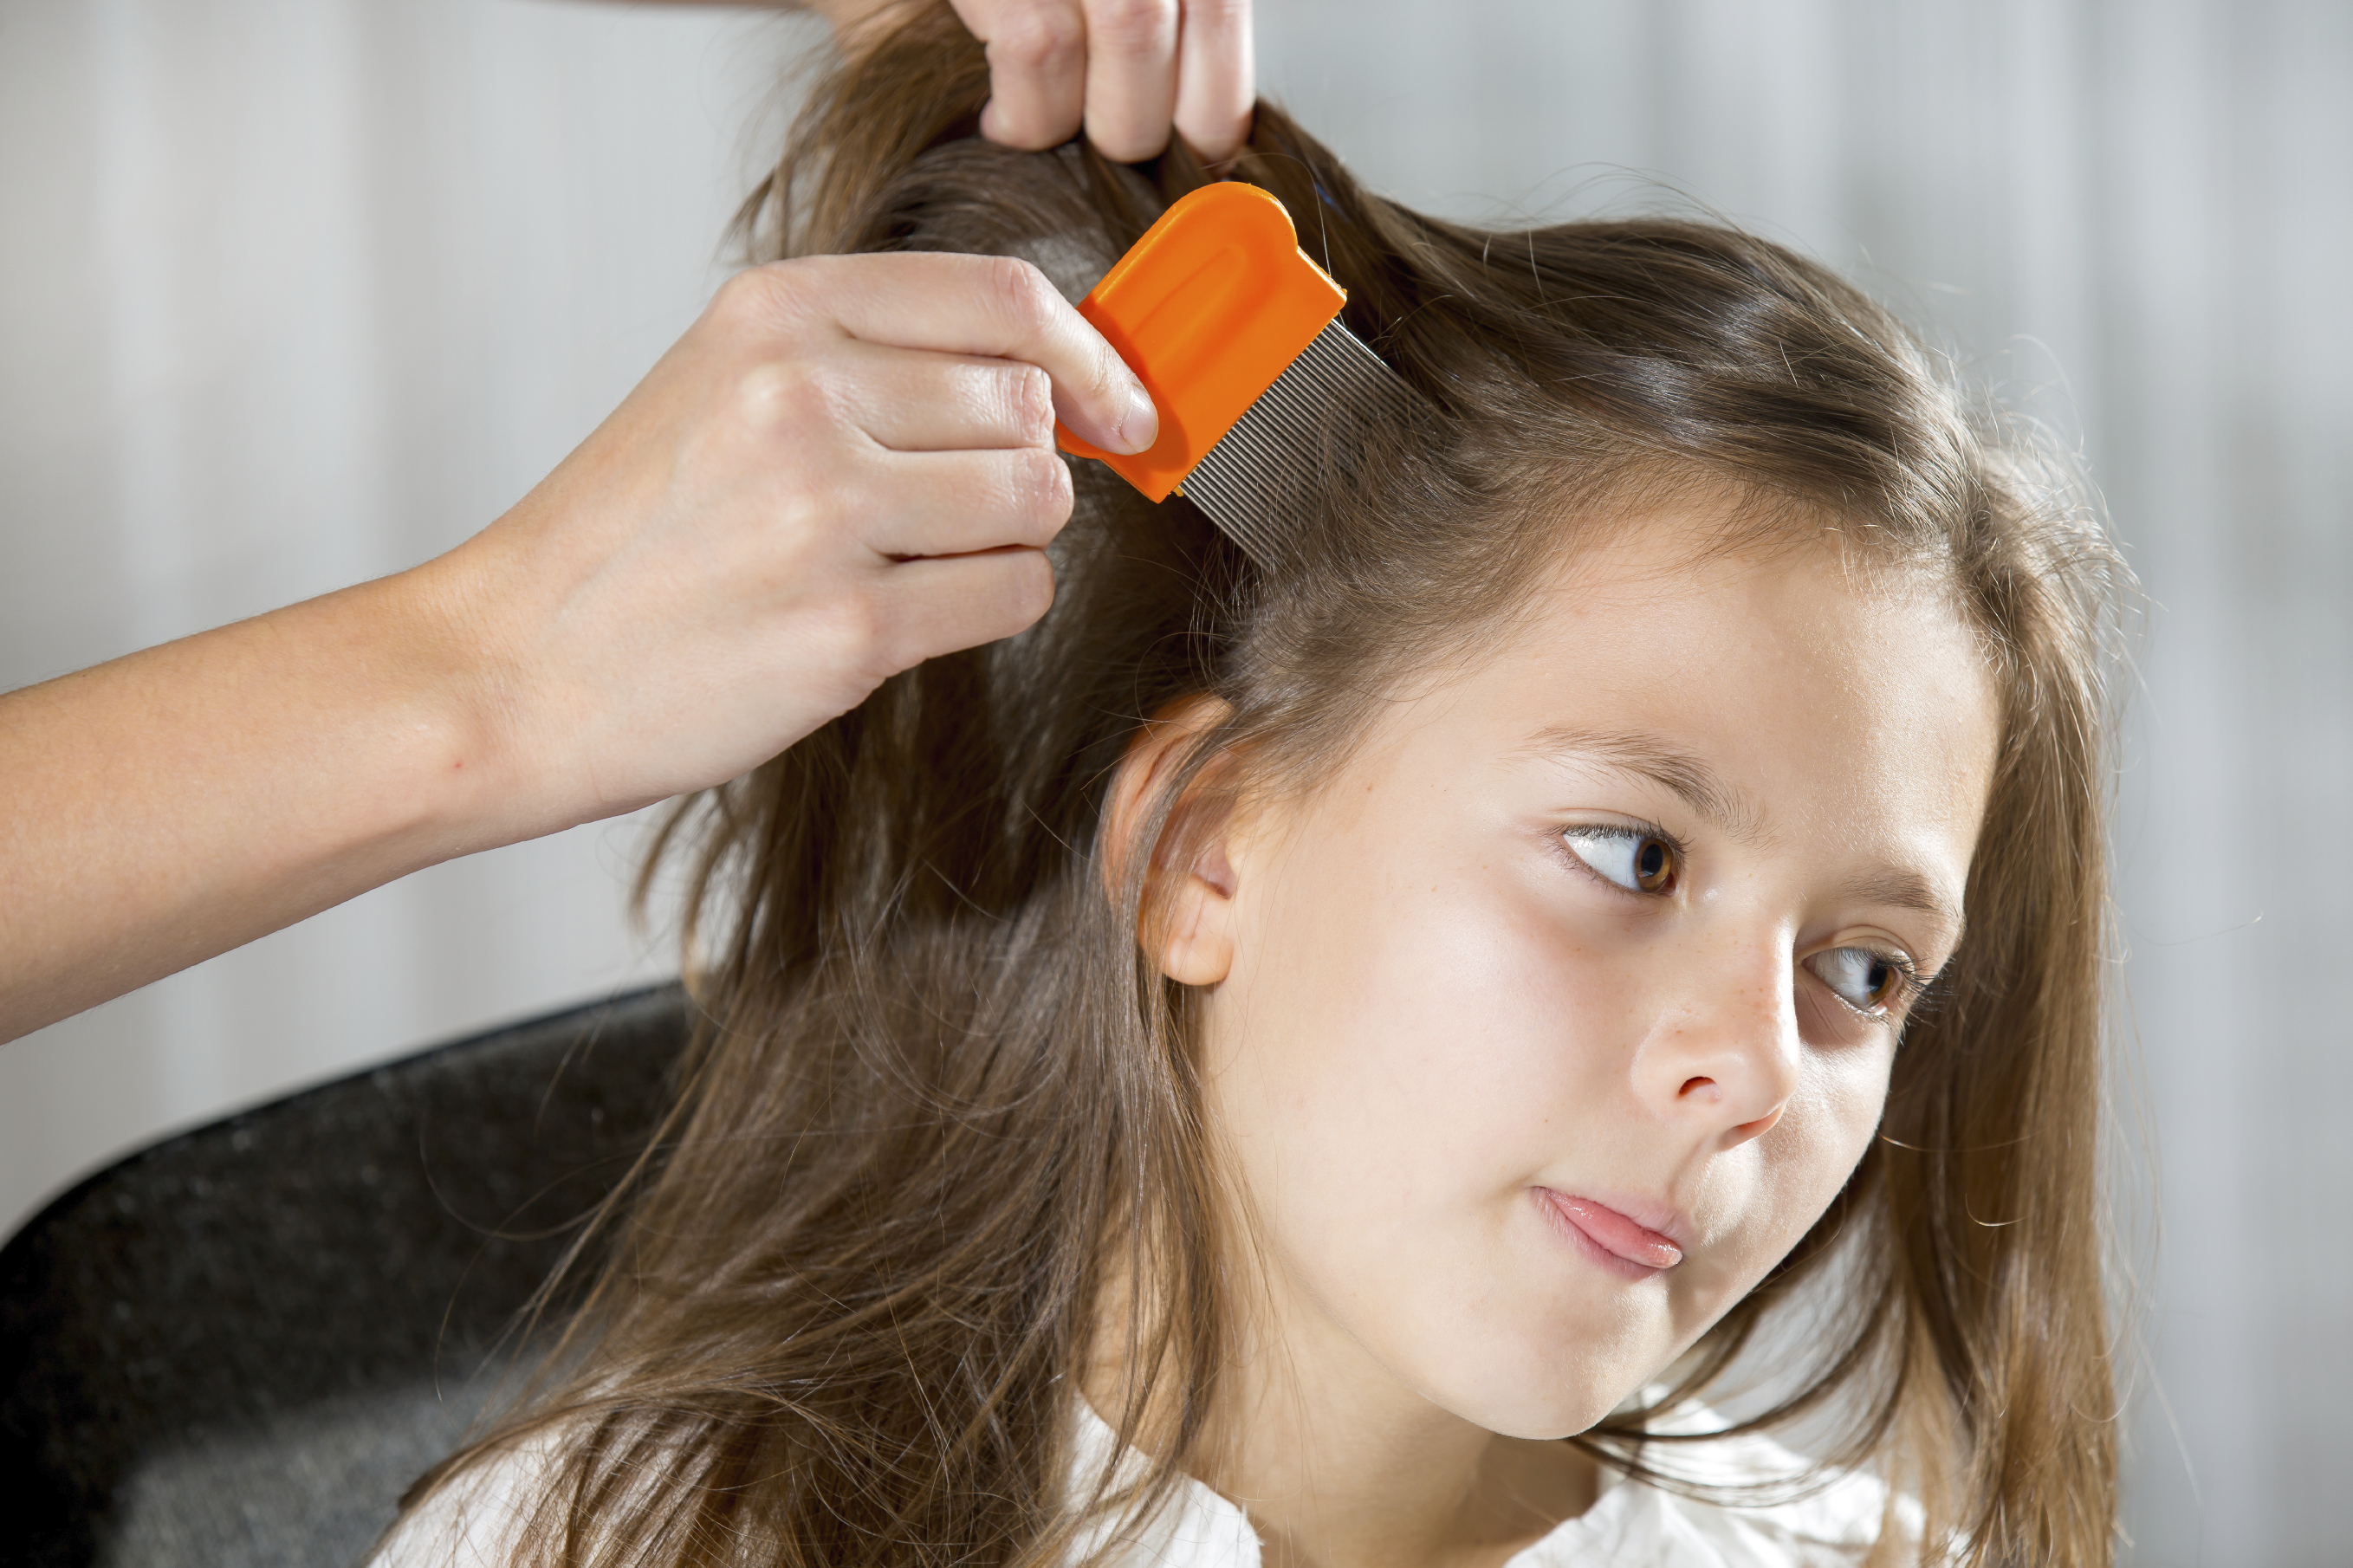 LiceGuard® Shampoo: Can it Wash Away Your Lice?